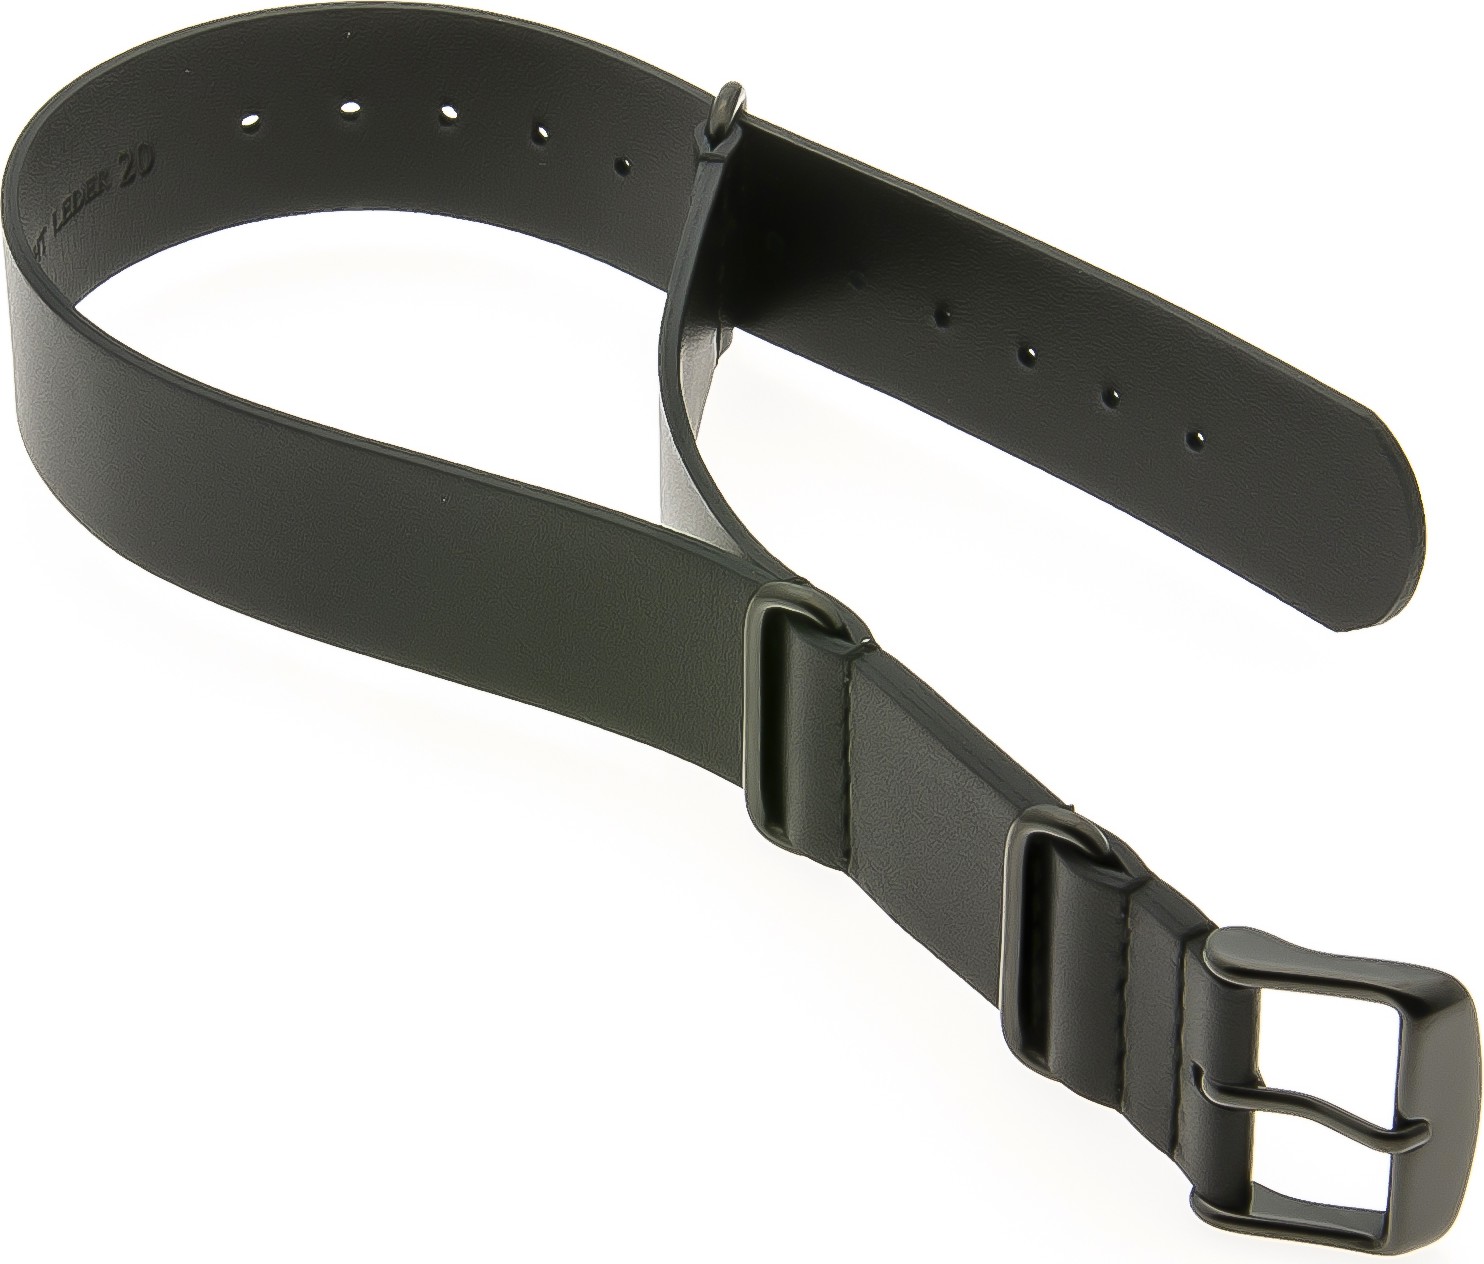  NATO PVD Watch Strap - Buckle - Leather Military Band PVD- black 18 mm. 20 mm, 22 mm, 24 mm 